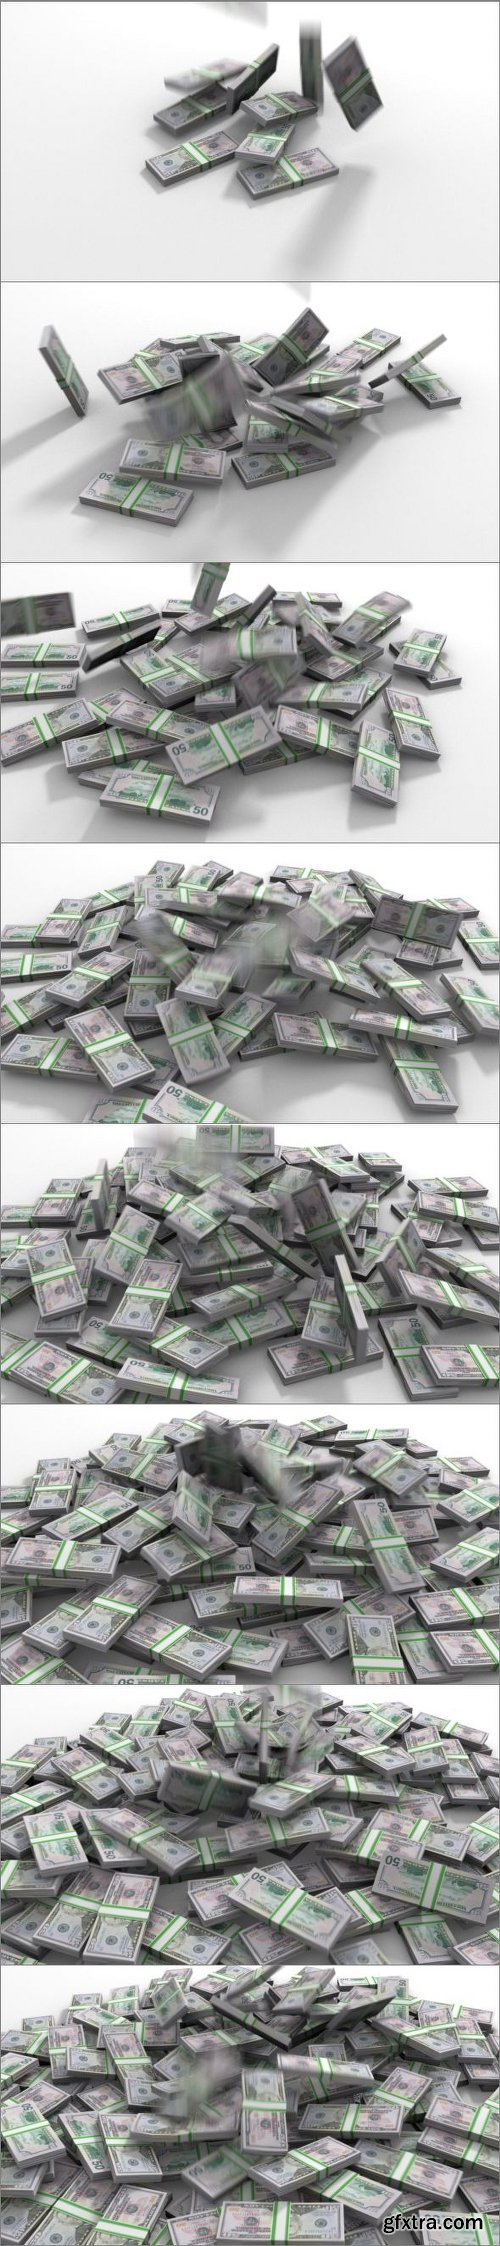 Banknotes Consisting Of Us Dollars Fall And Form A Huge Pile